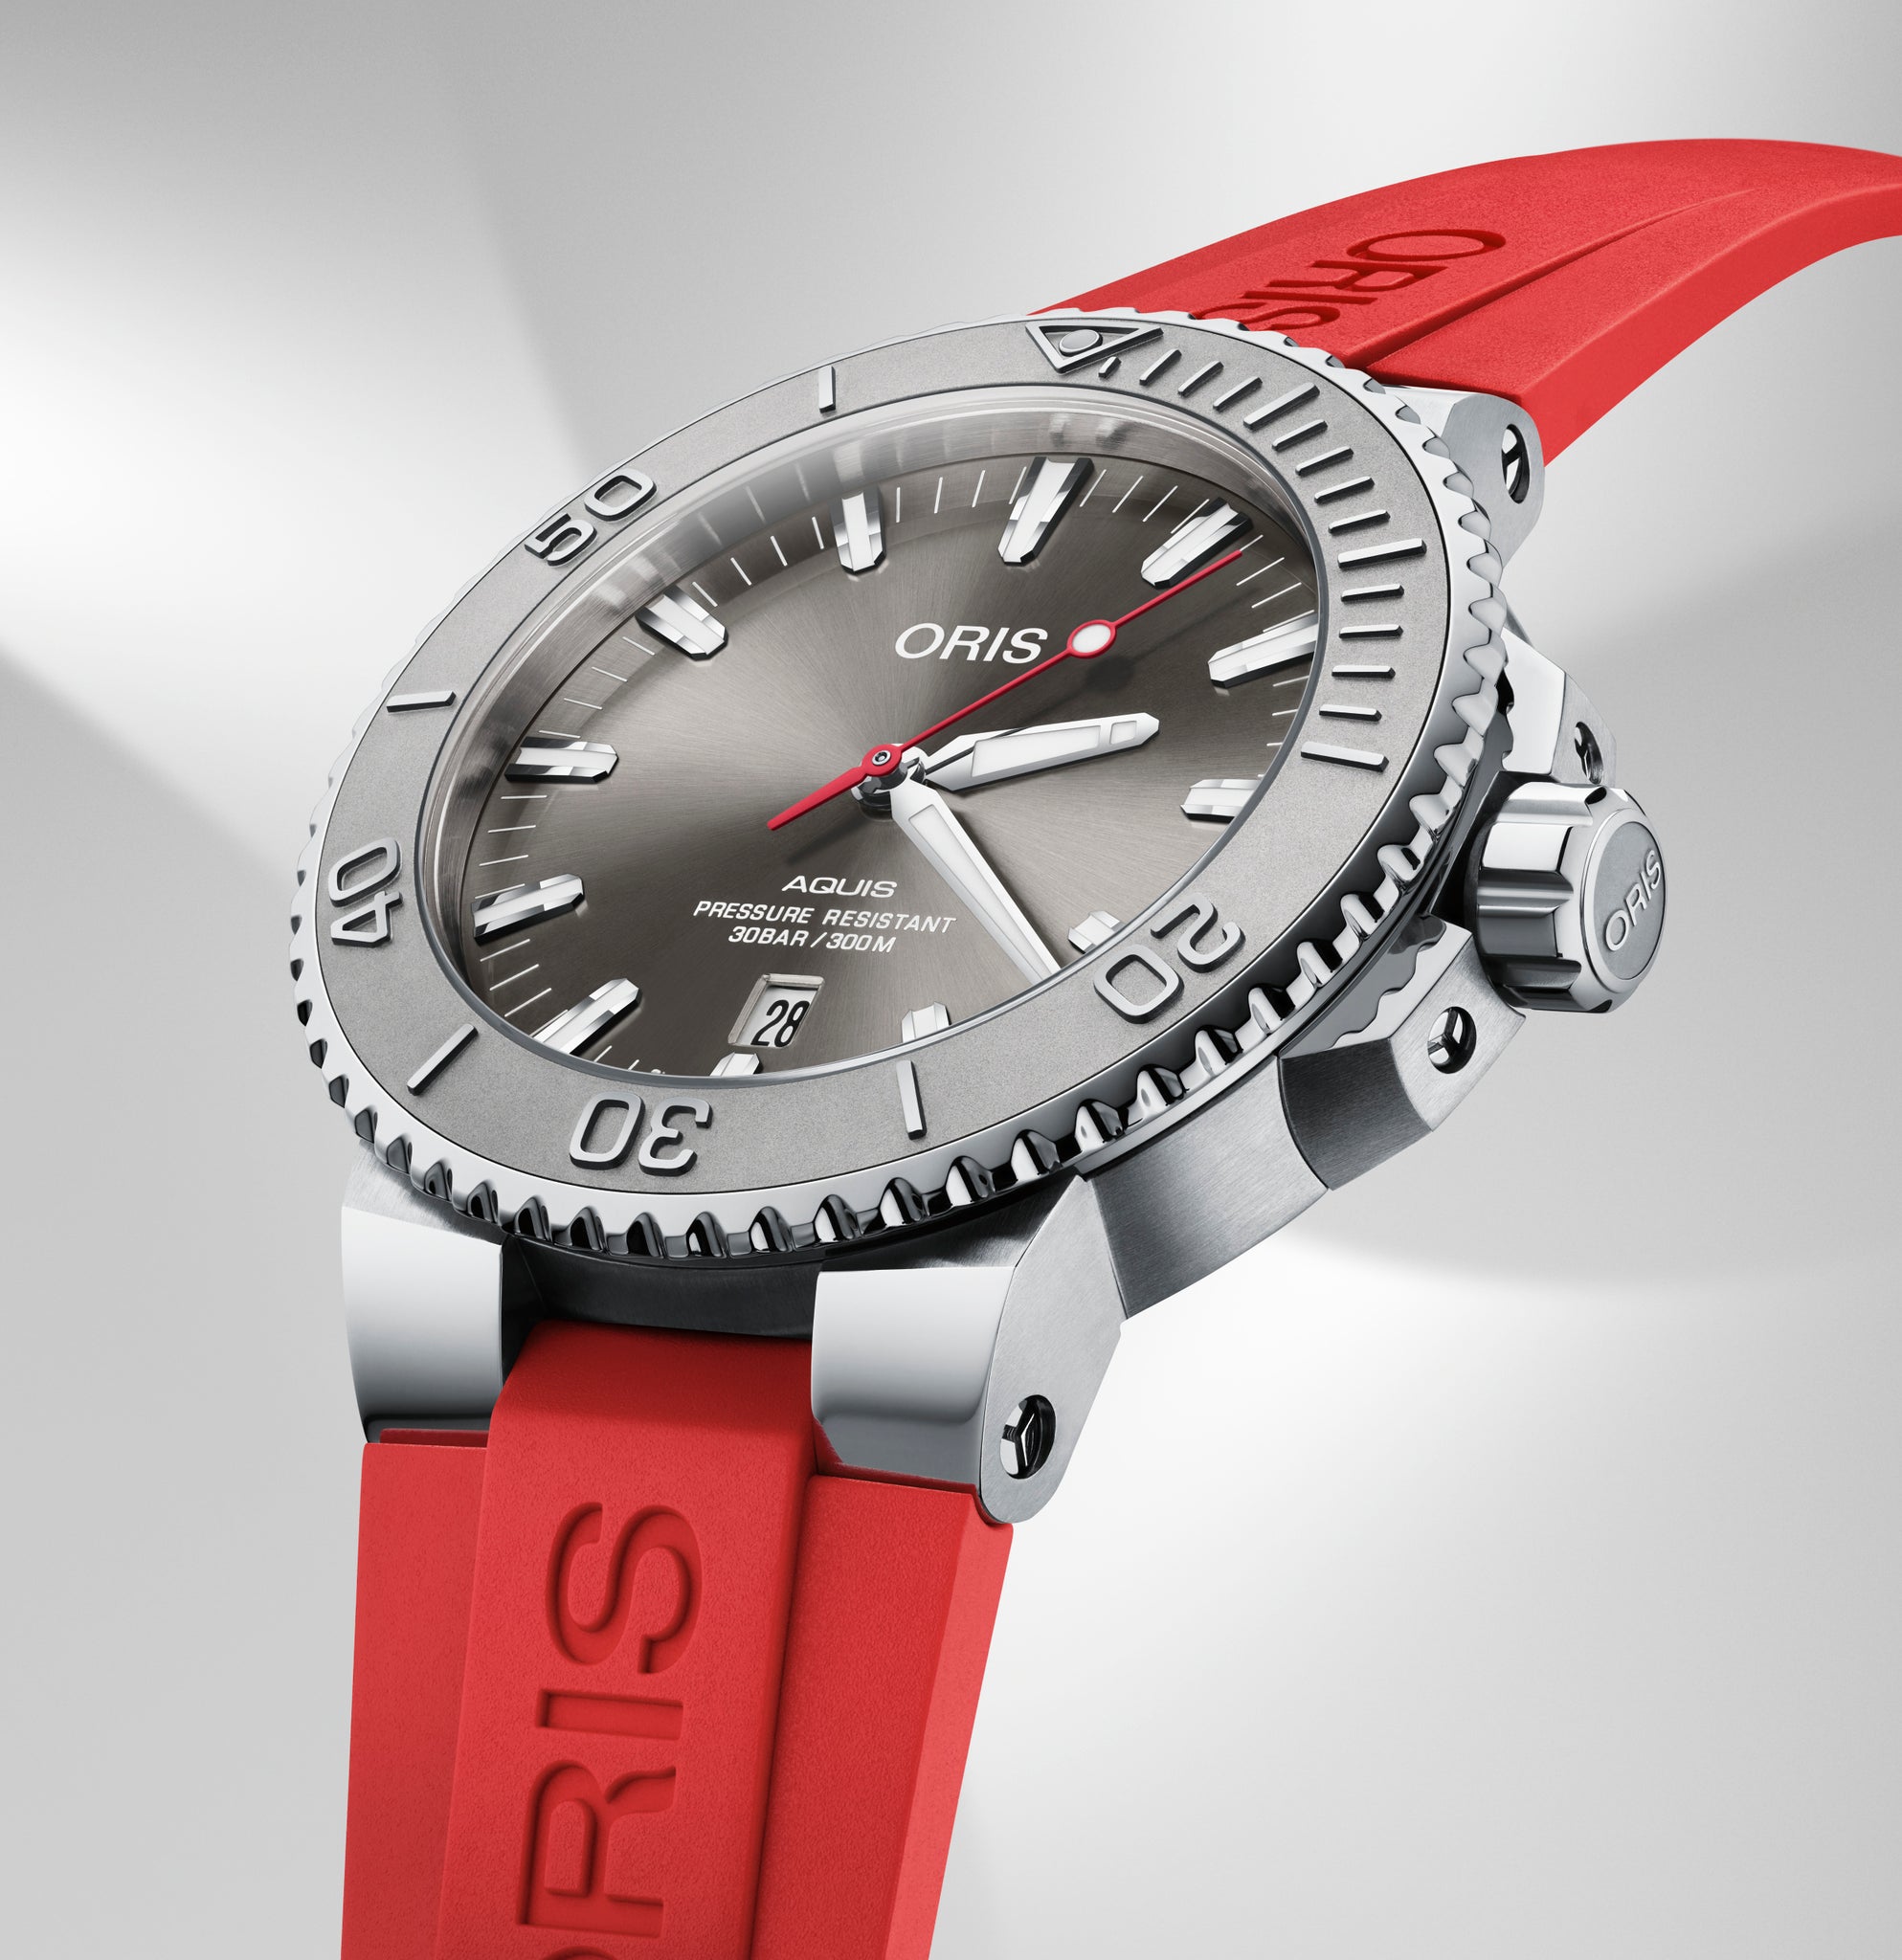 Oris Aquis Date Relief Limited Edition